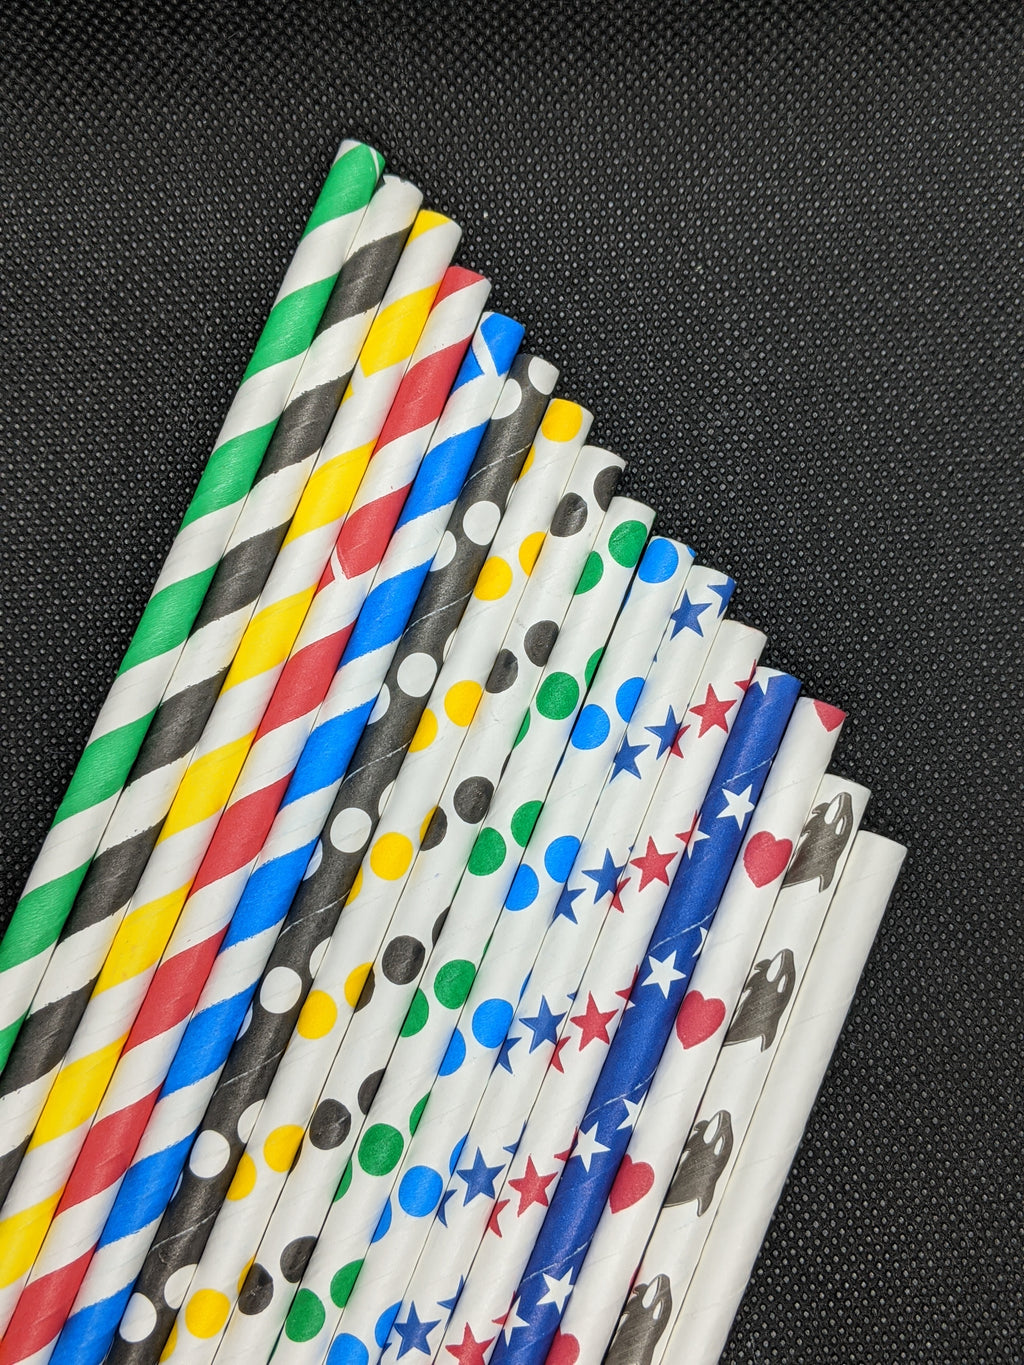 7.75" PAPER STRAWS - VARIETY DESIGNS - 300 CT (WRAPPED)